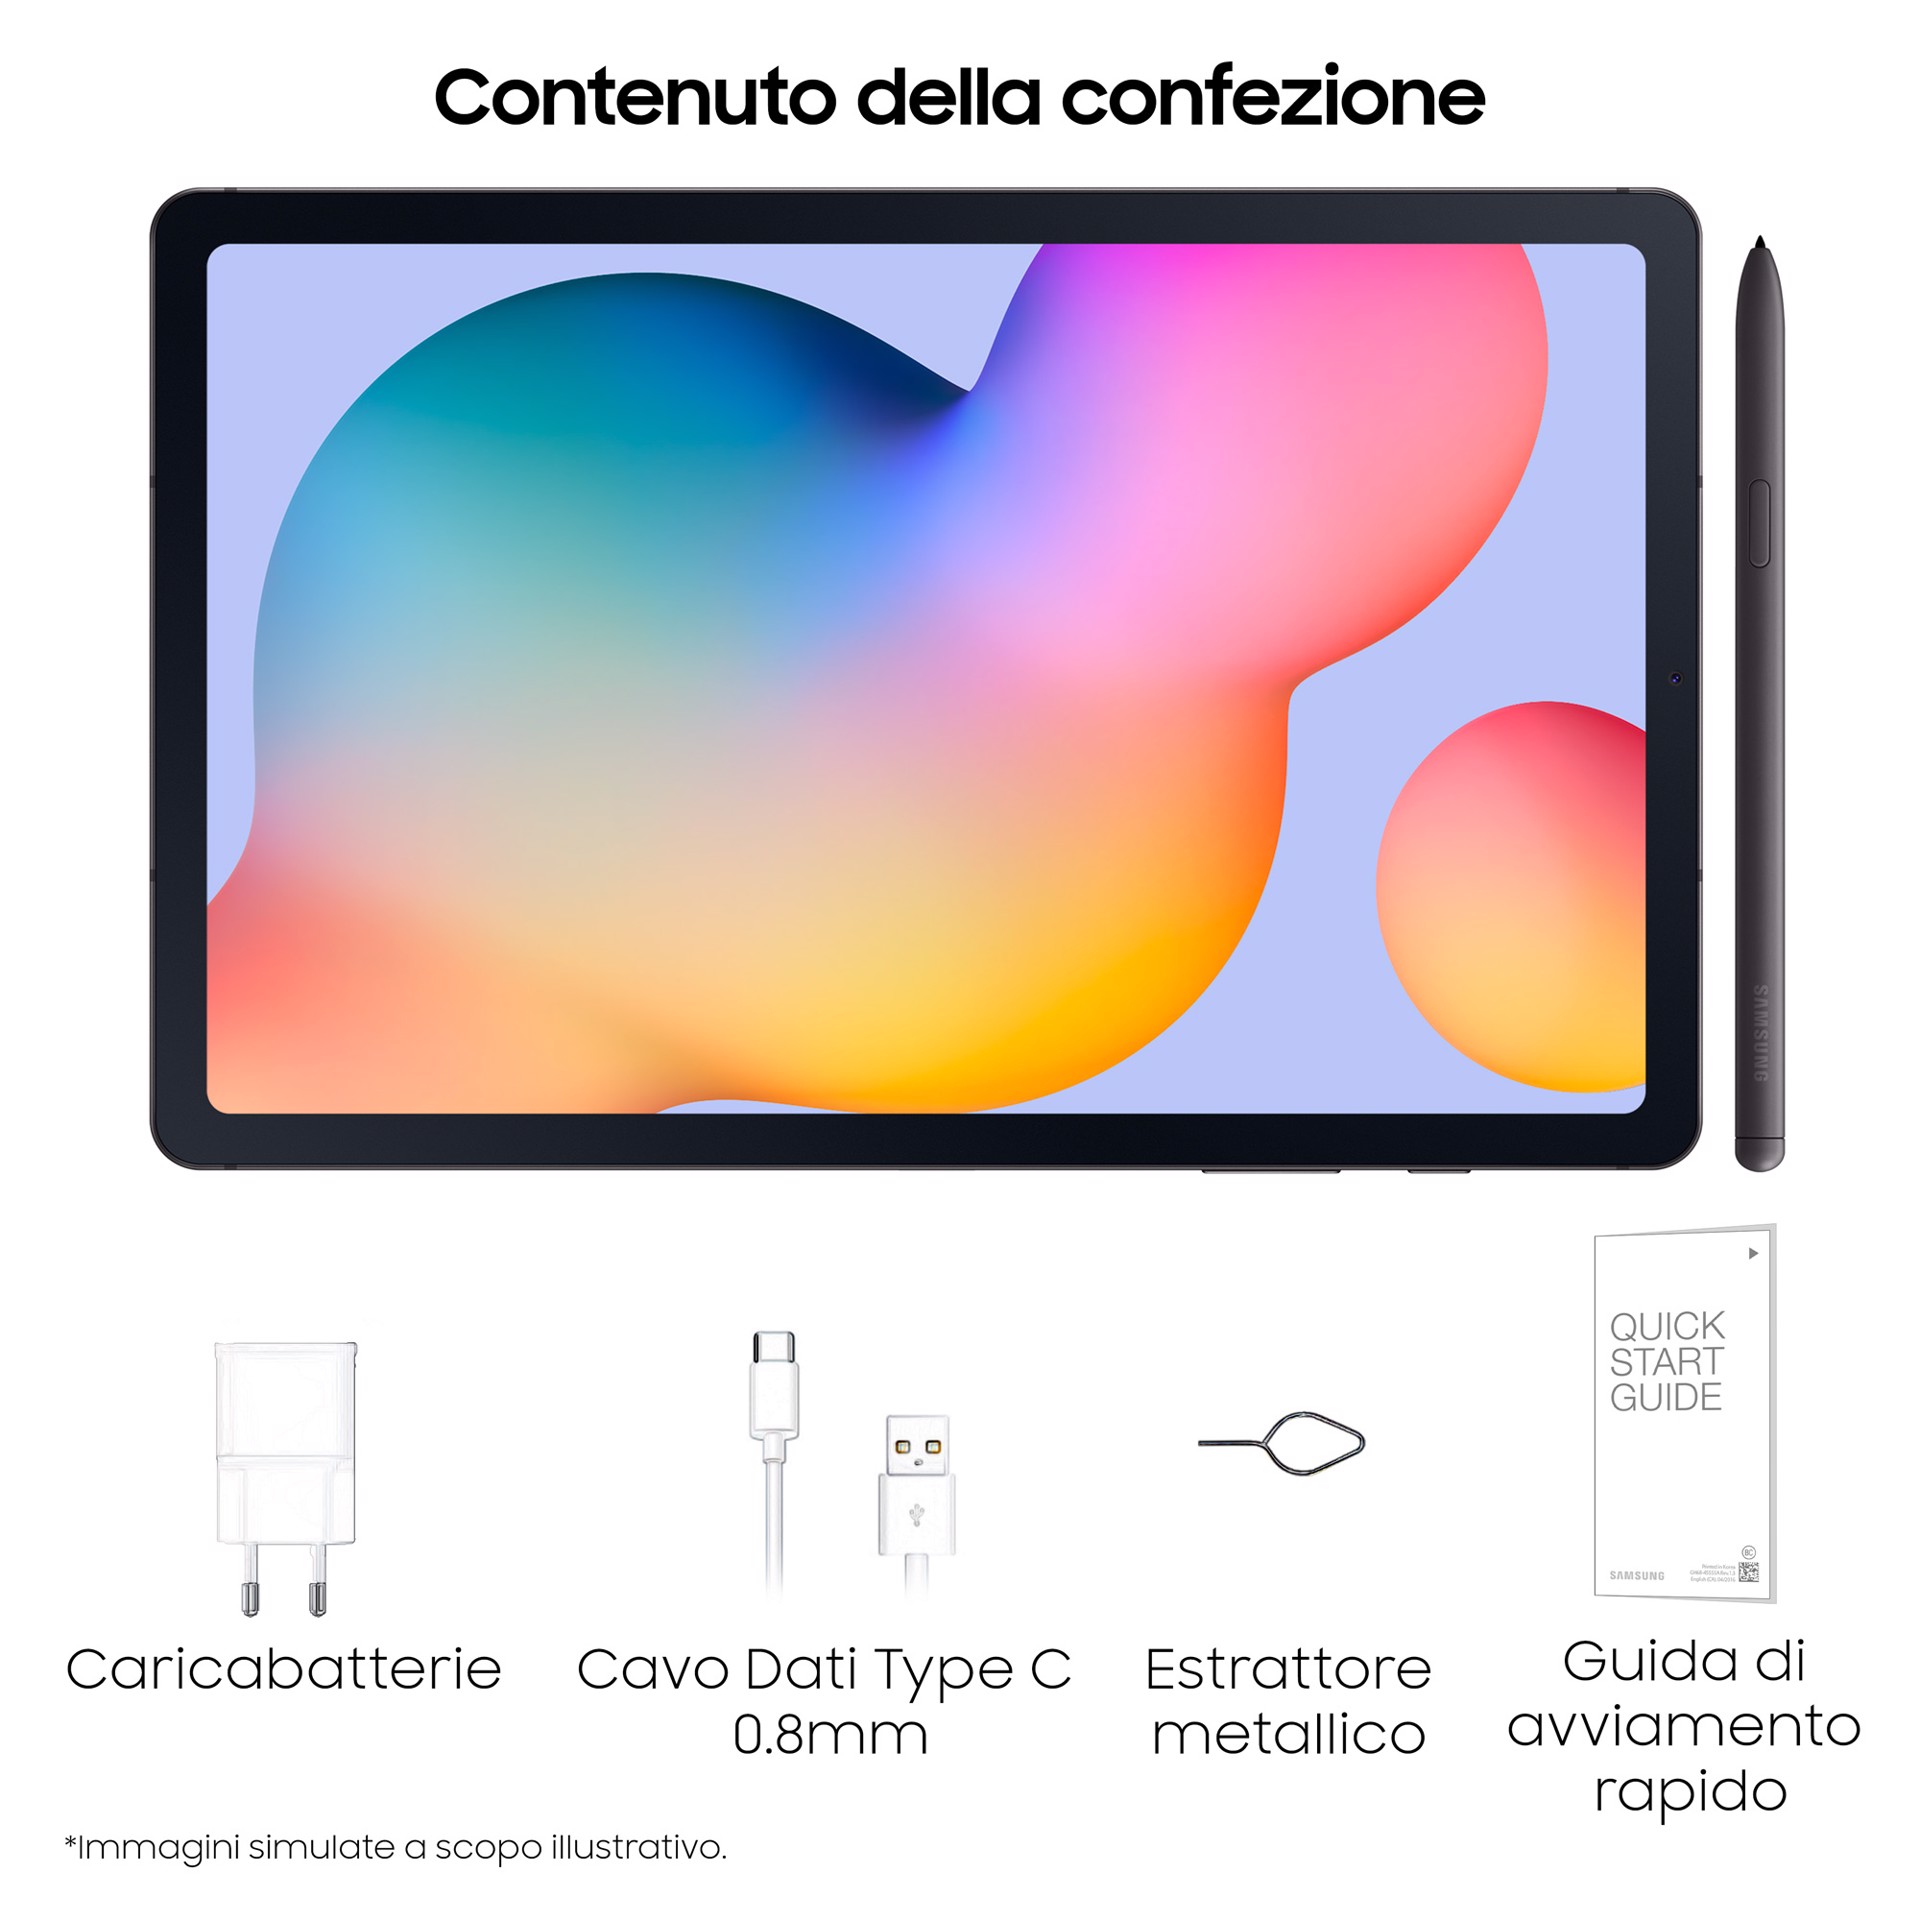 SAMSUNG Galaxy Tab S6 Lite (2022) Tablet Android 10.4 Pollici Wi-Fi RAM 4  GB, 64 GB espandibili Tablet Android 12 Oxford Gray, Tablet in Offerta su  Stay On